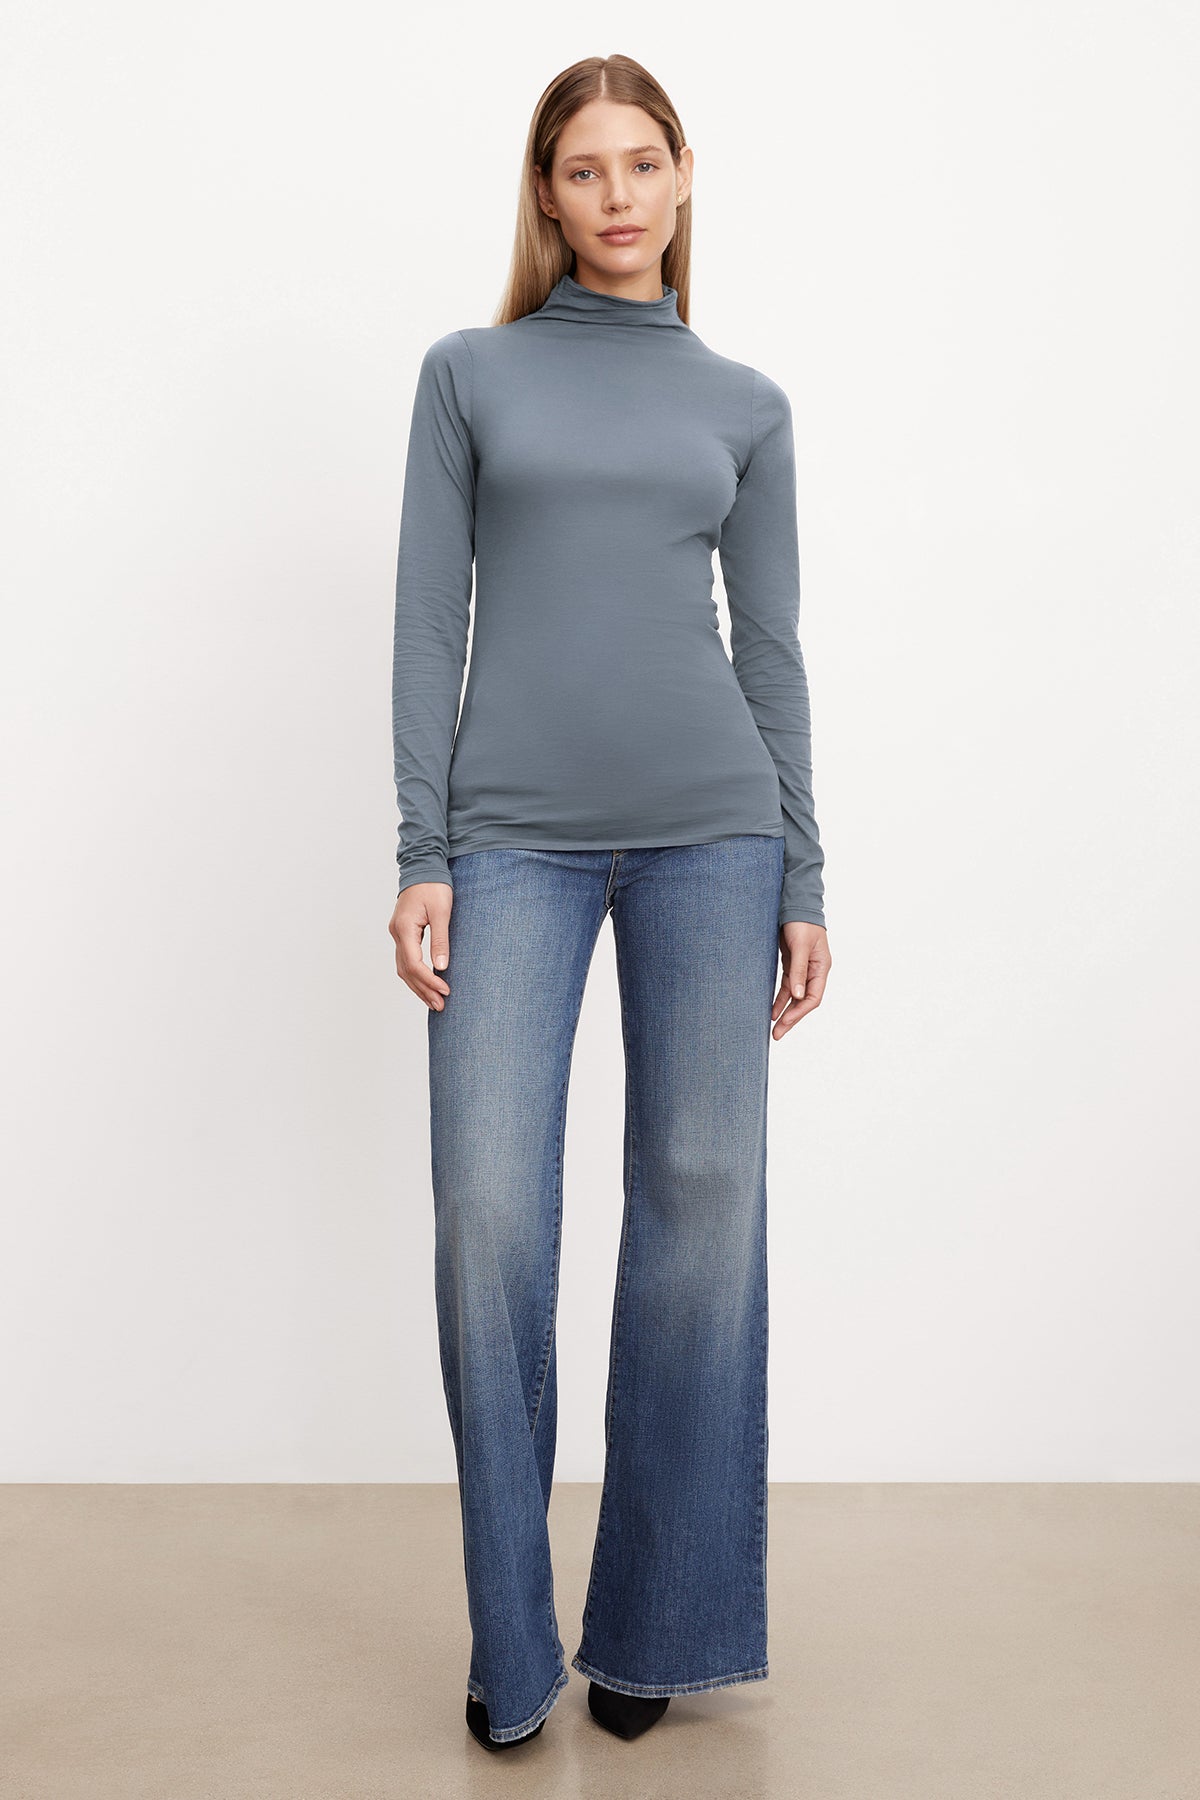 A model wearing a TALISIA GAUZY WHISPER FITTED MOCK NECK TEE from Velvet by Graham & Spencer and wide leg jeans.-36001491681473